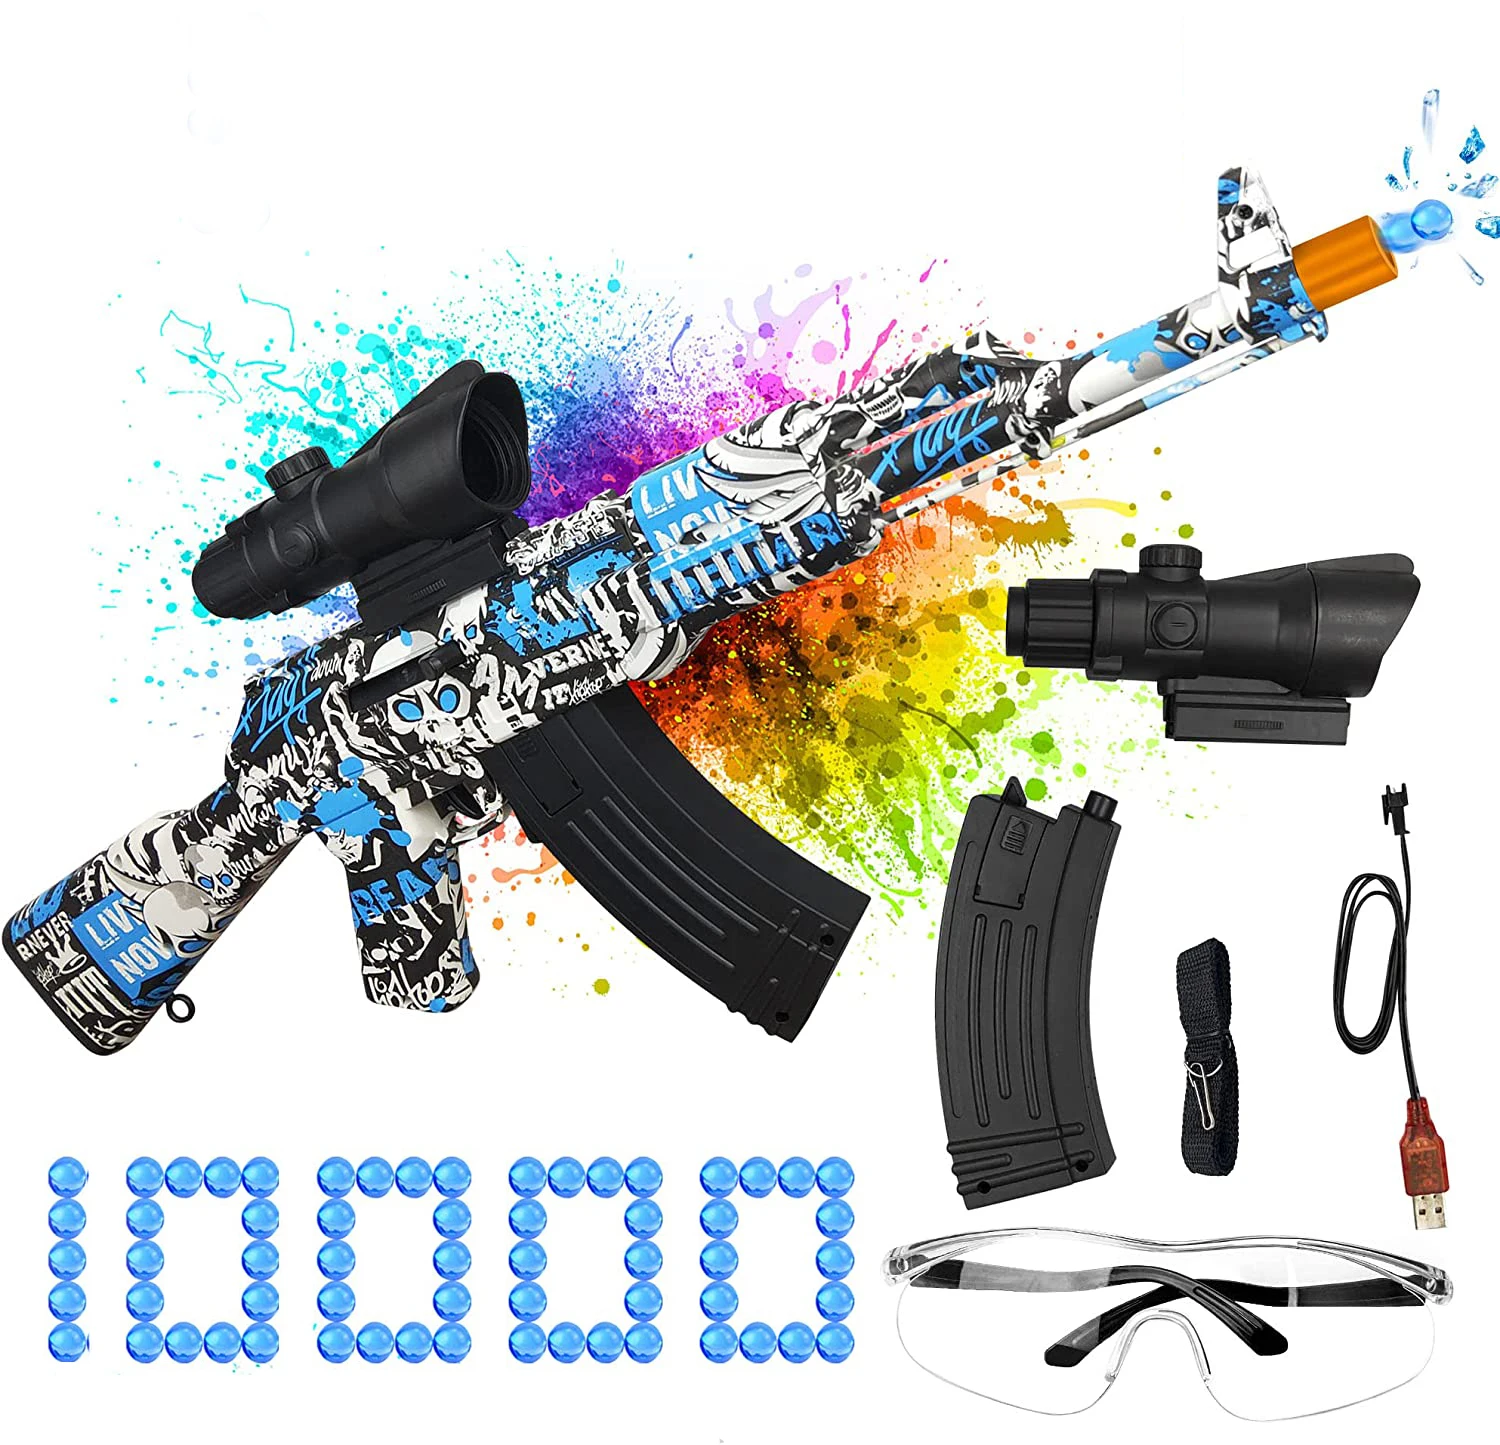 Automatic Splatter M416 Rifle Paintball Outdoor Game Airsoft